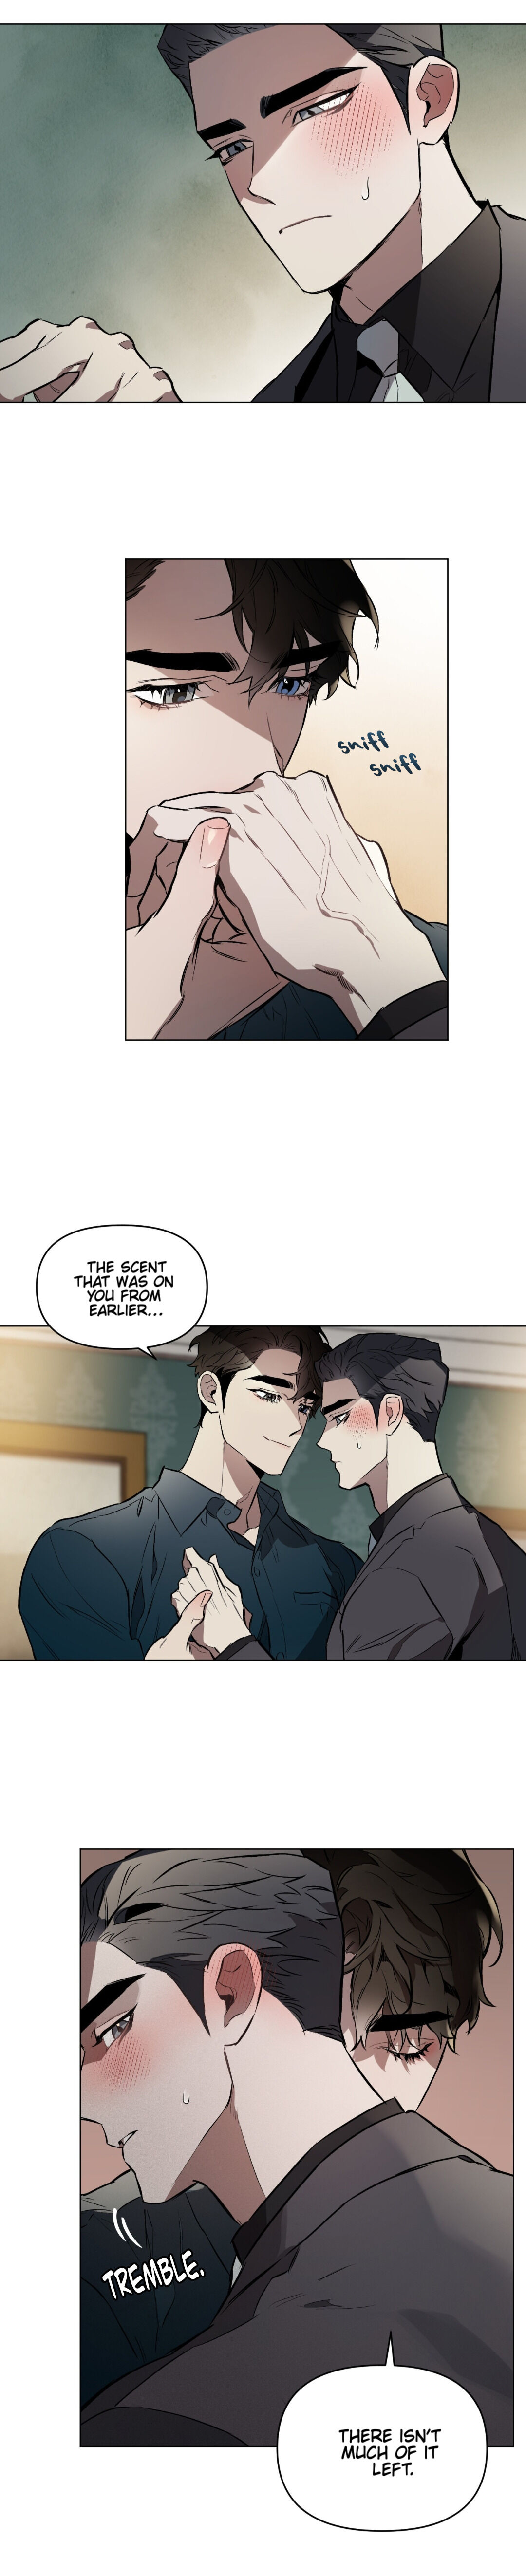 Define The Relationship (Yaoi) - Page 1